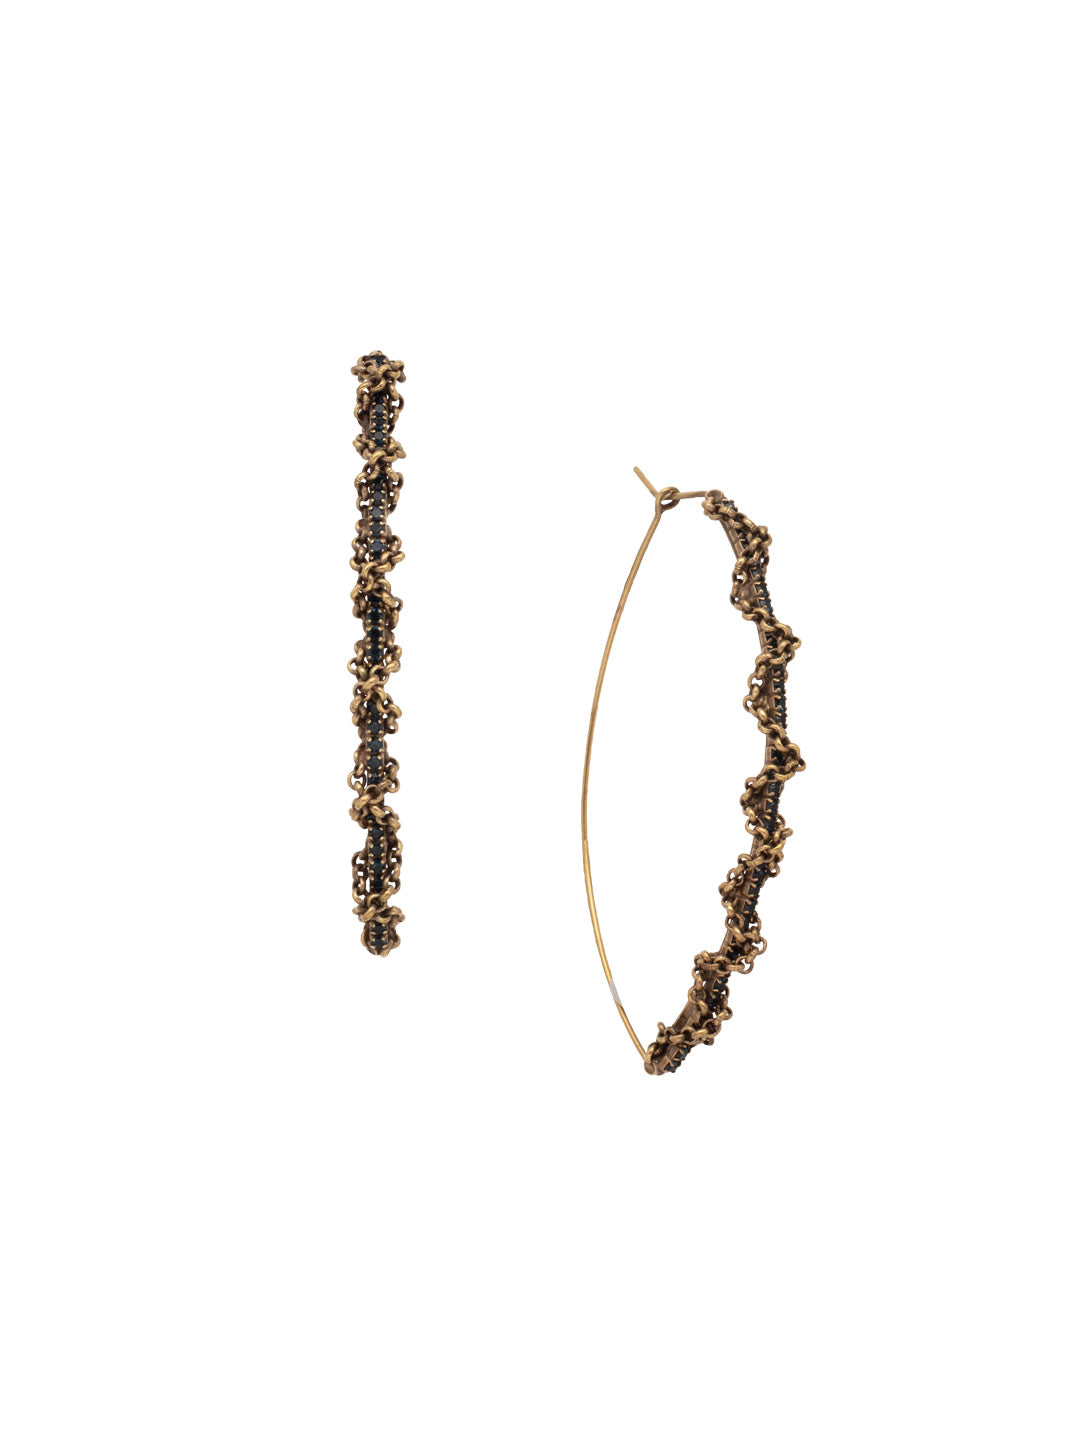 Brandi Oblong Hoop Earring - EFC61AGVBN - <p>The Brandi Oblong Hoop Earrings feature a classic crystal studded hoop, elevated with a braided chain and elongated oblong hoop design. From Sorrelli's Venice Blue collection in our Antique Gold-tone finish.</p>